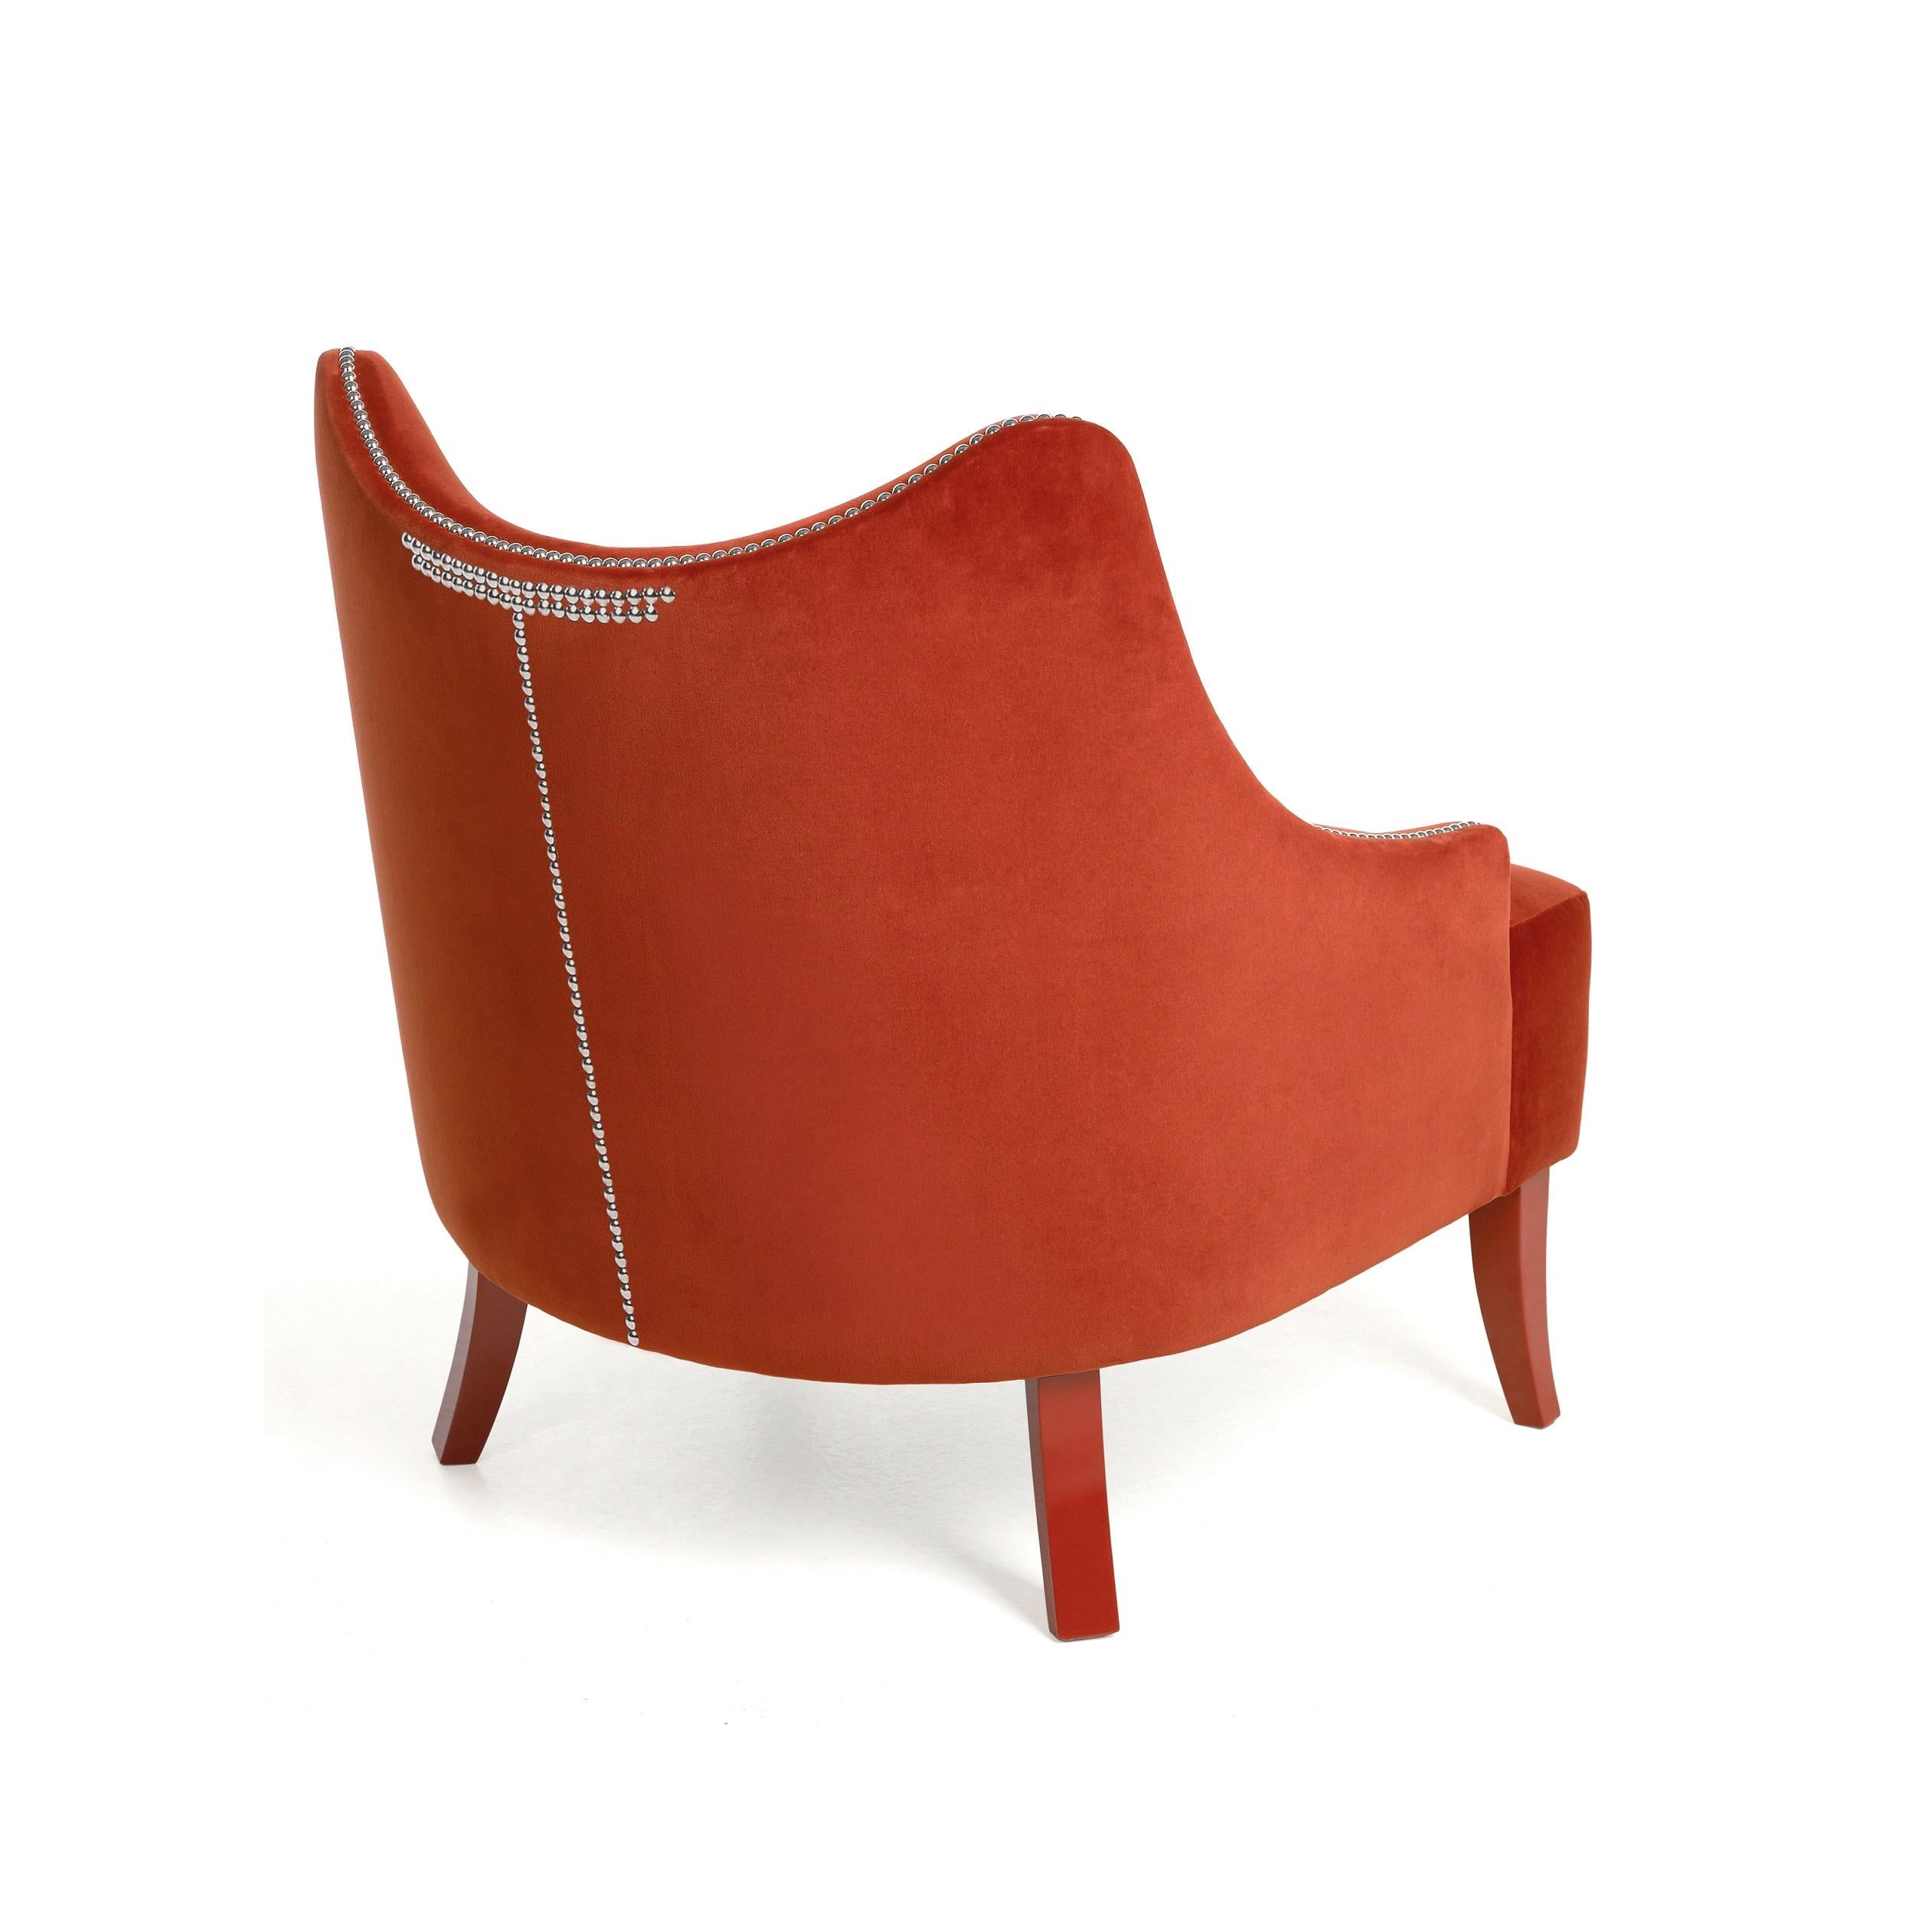 Contemporary Velvet Armchair Offered With Nails On The Curve & Back (Moderne) im Angebot